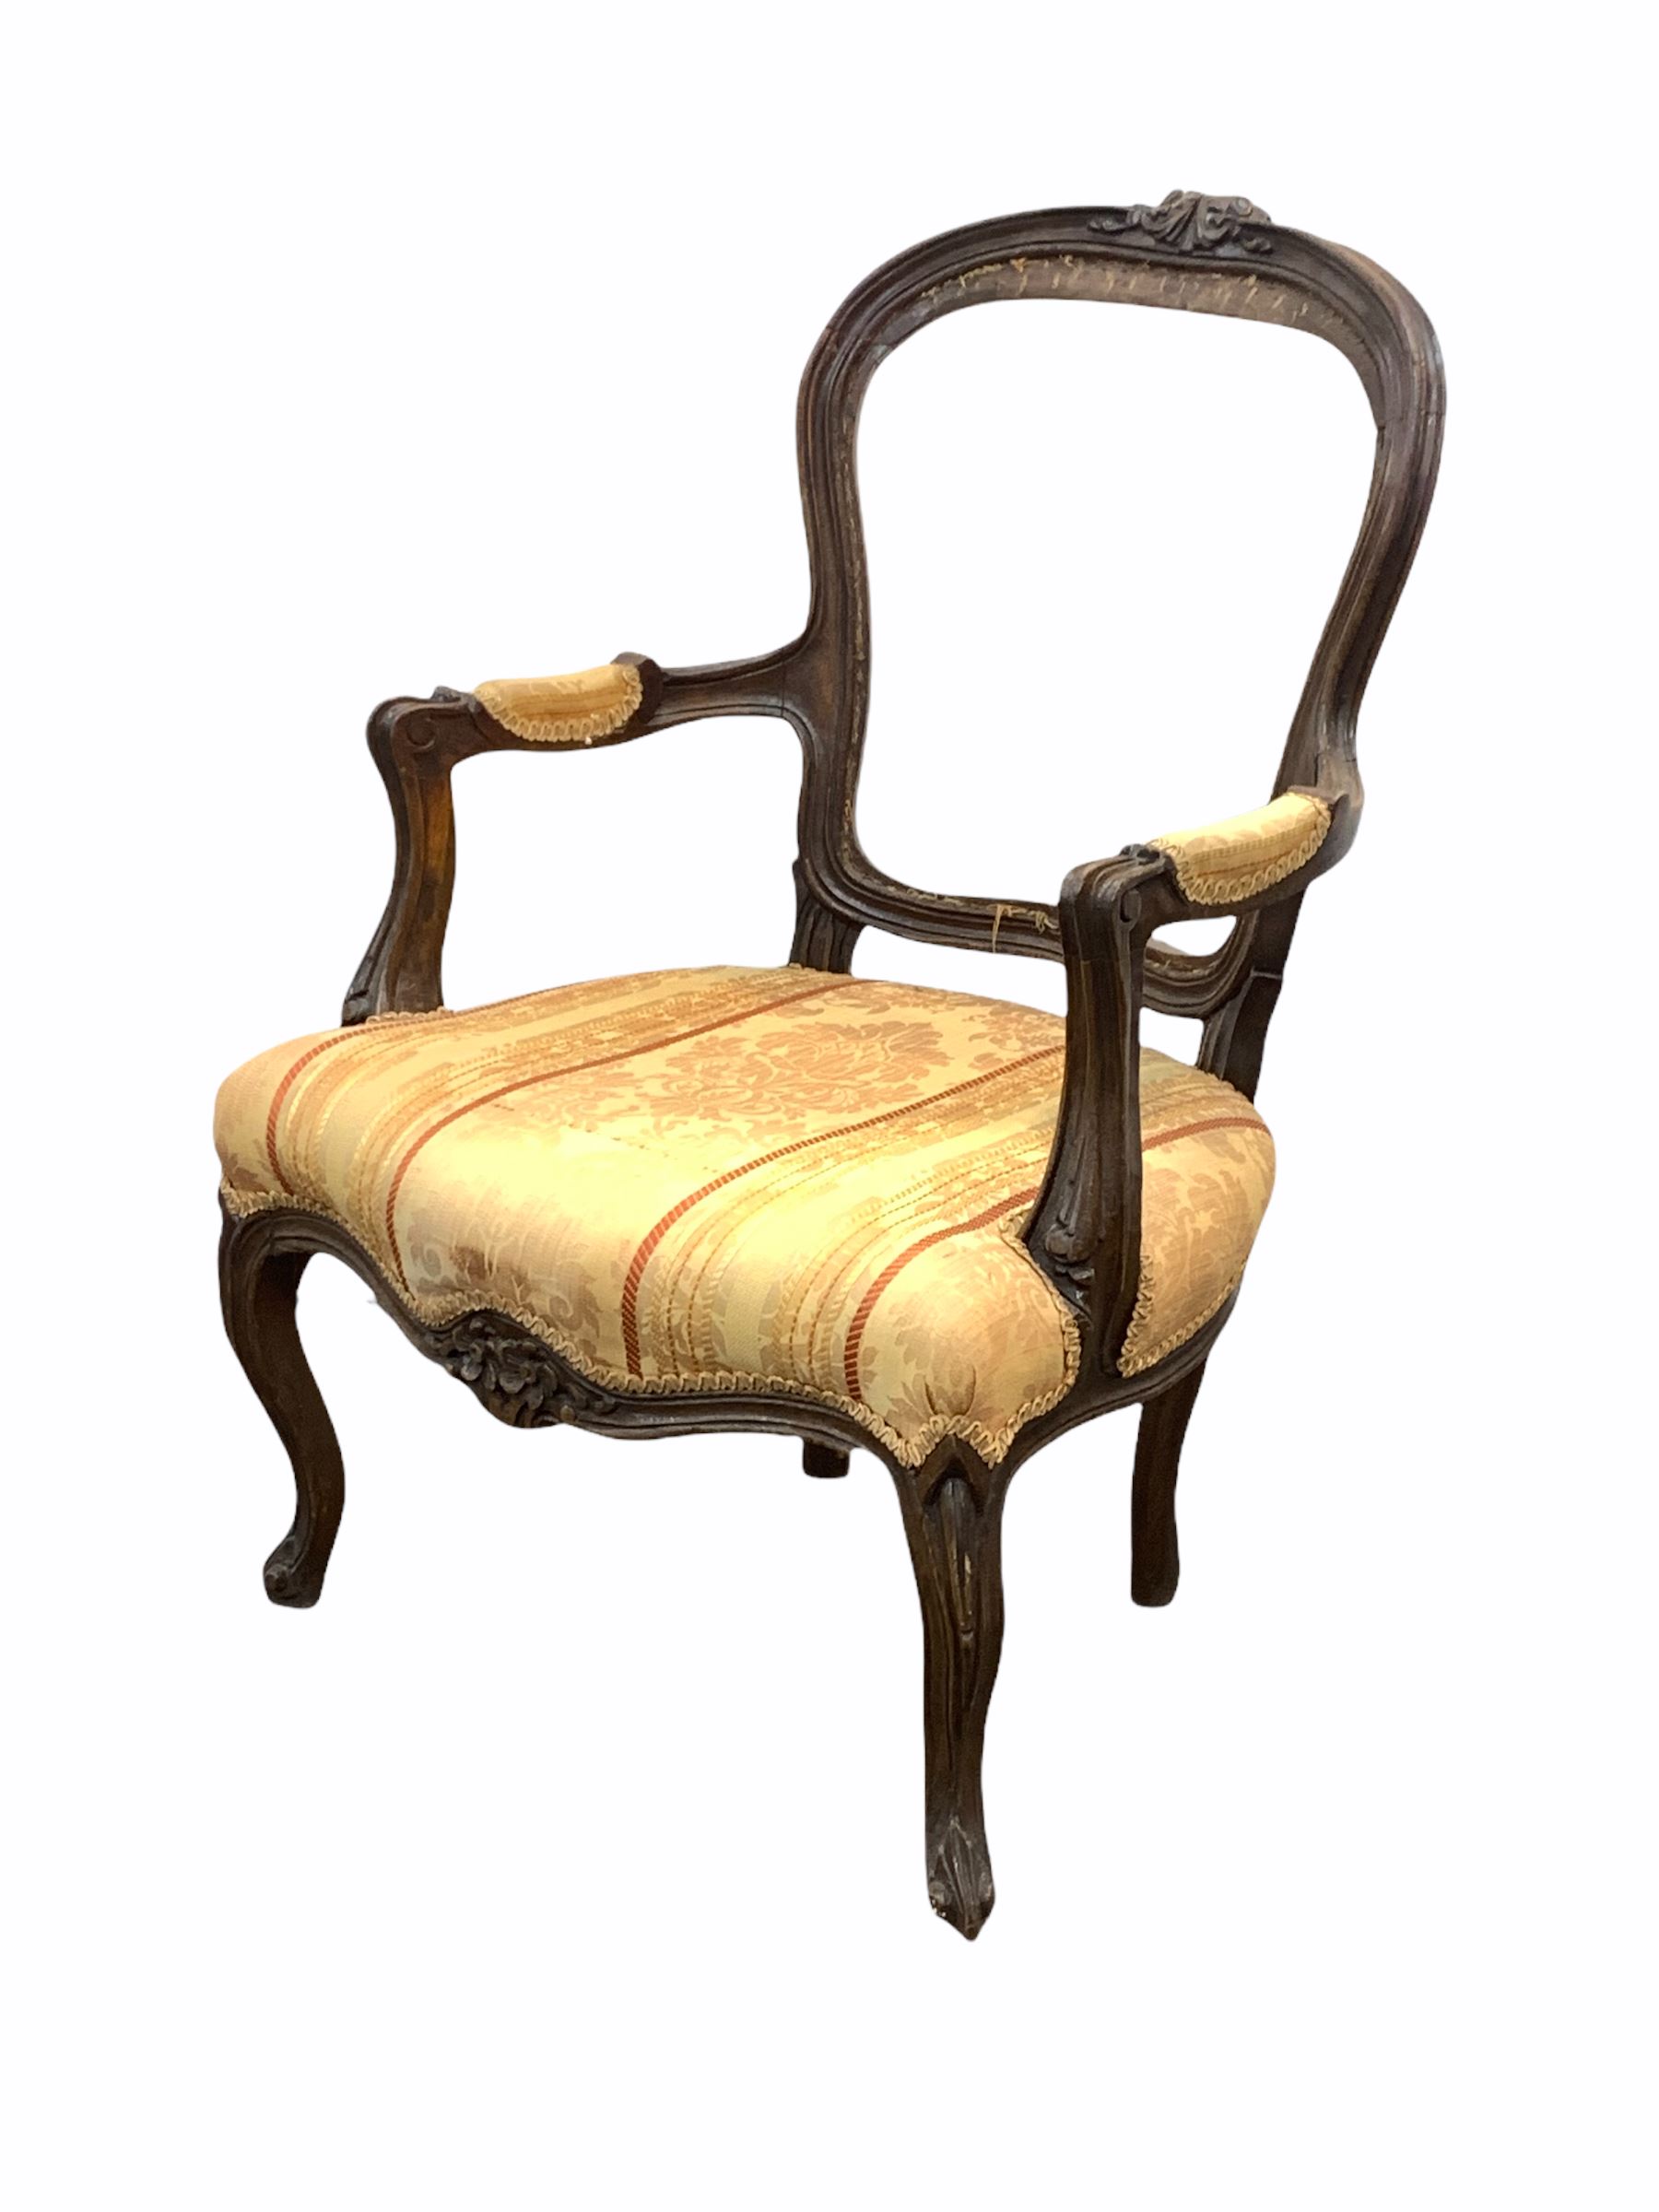 Pair of 19th century spindle back dining chairs with upholstered seats and turned supports - Image 2 of 2